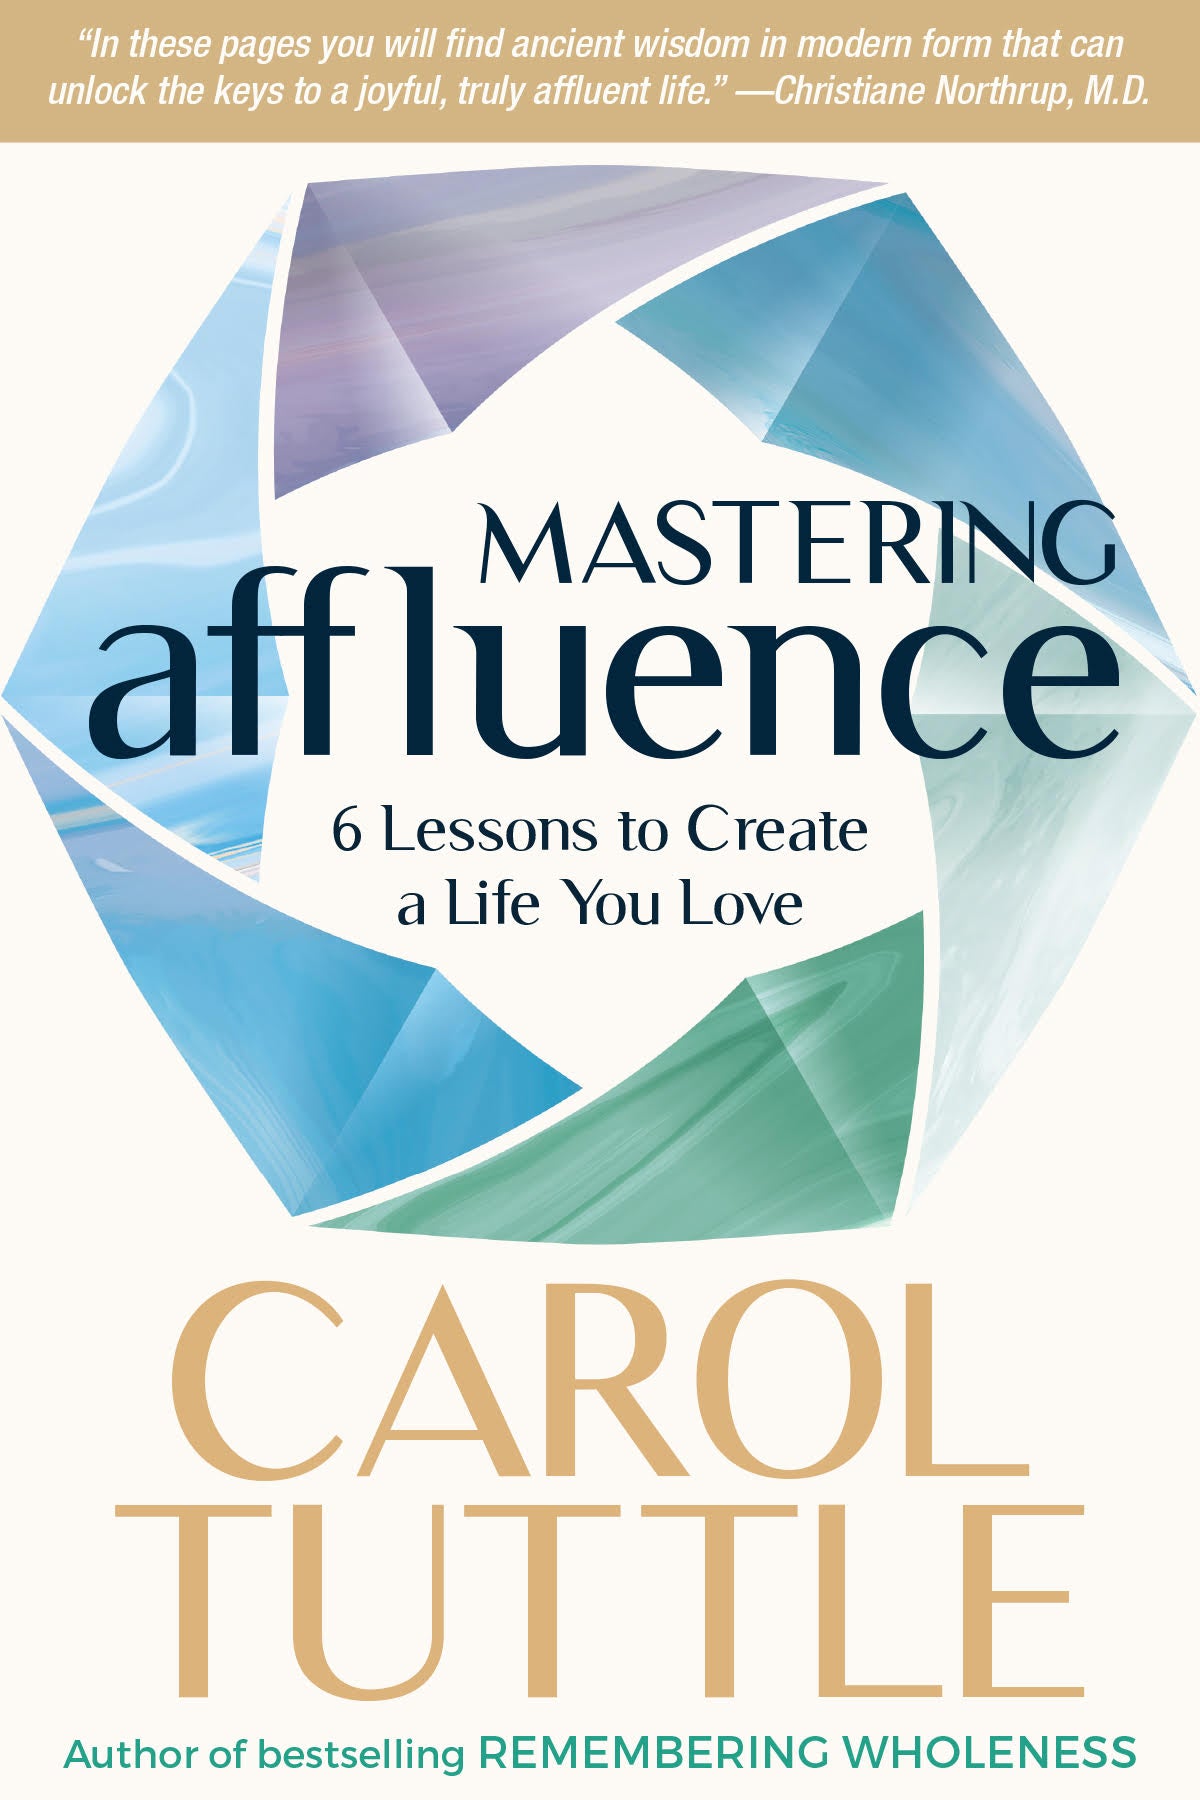 Special offering: Mastering Affluence: 6 Lessons to Create a Life You Love